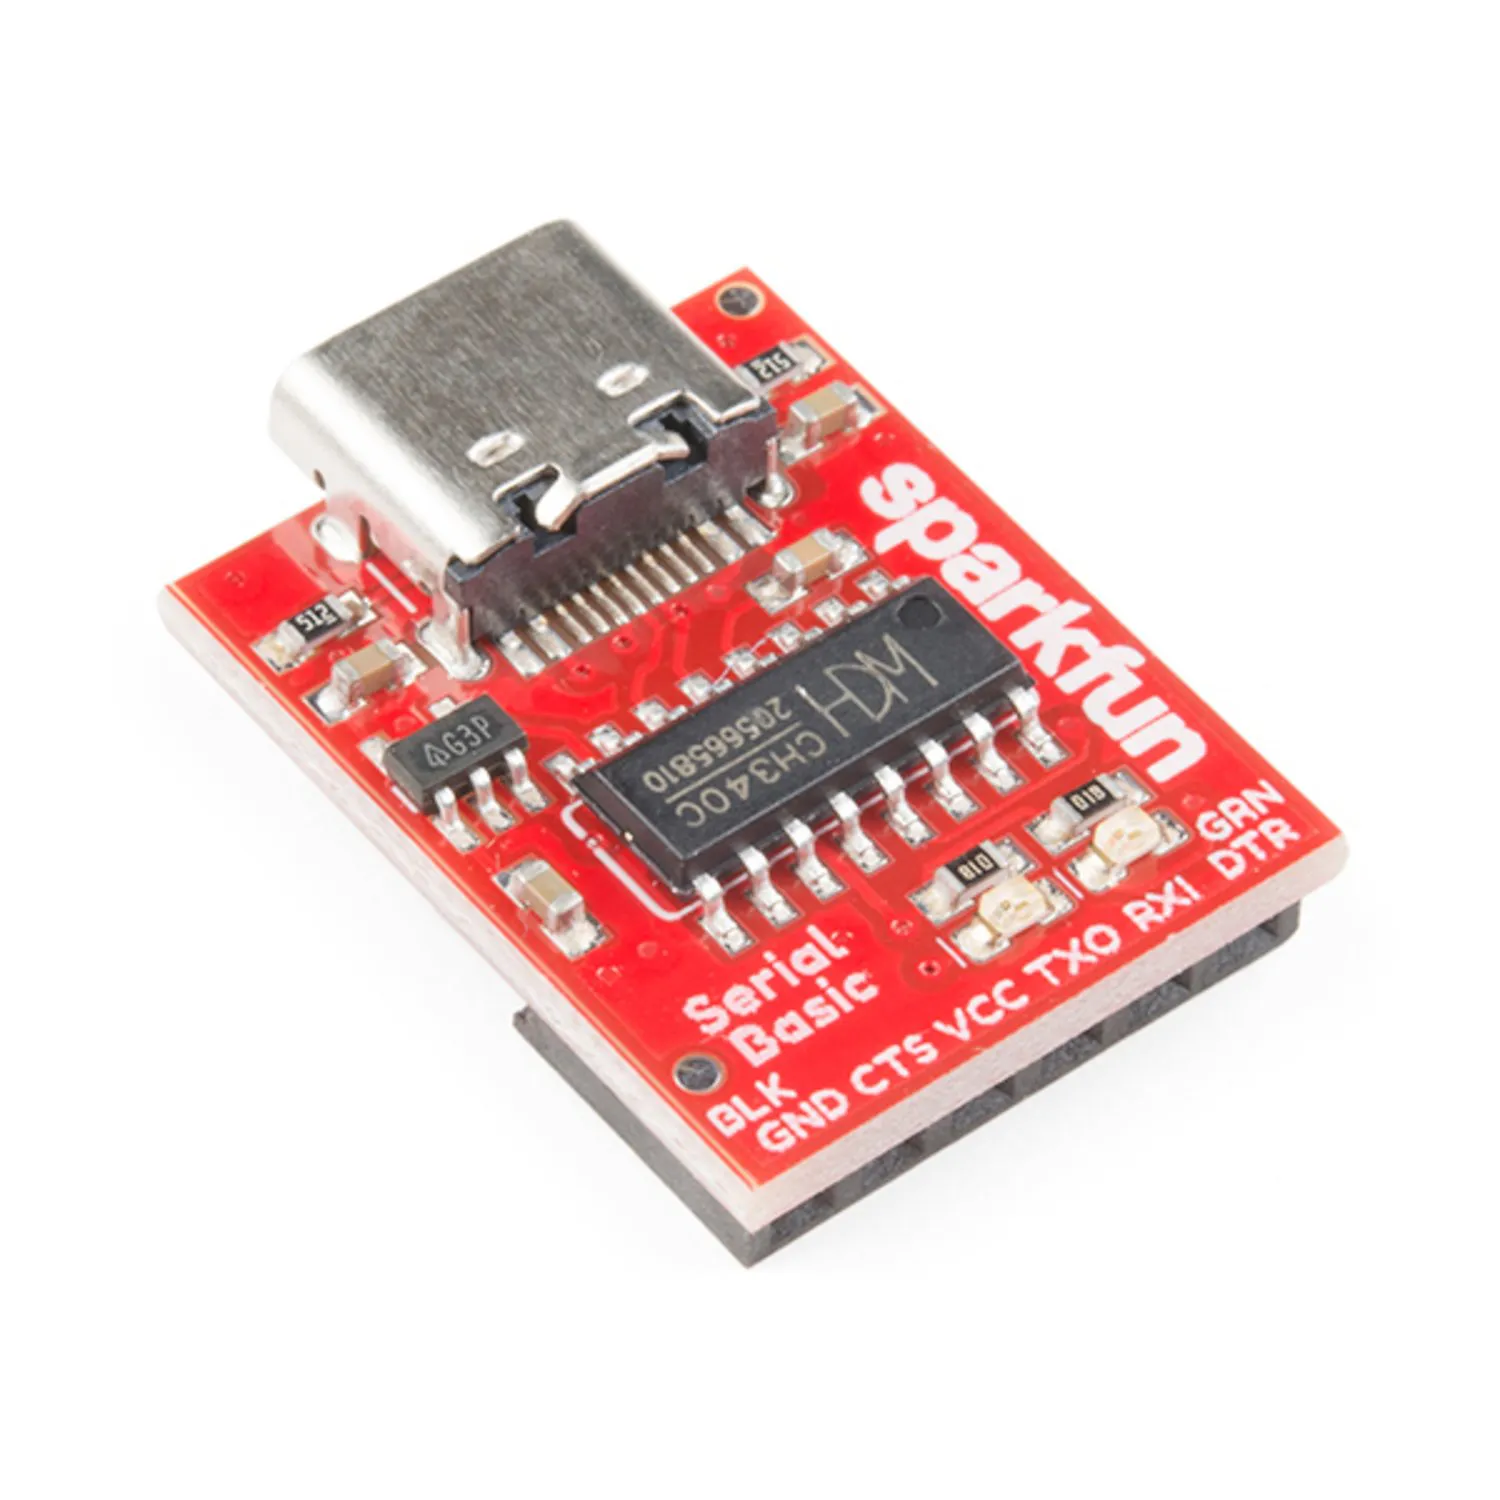 Photo of SparkFun Serial Basic Breakout - CH340C and USB-C